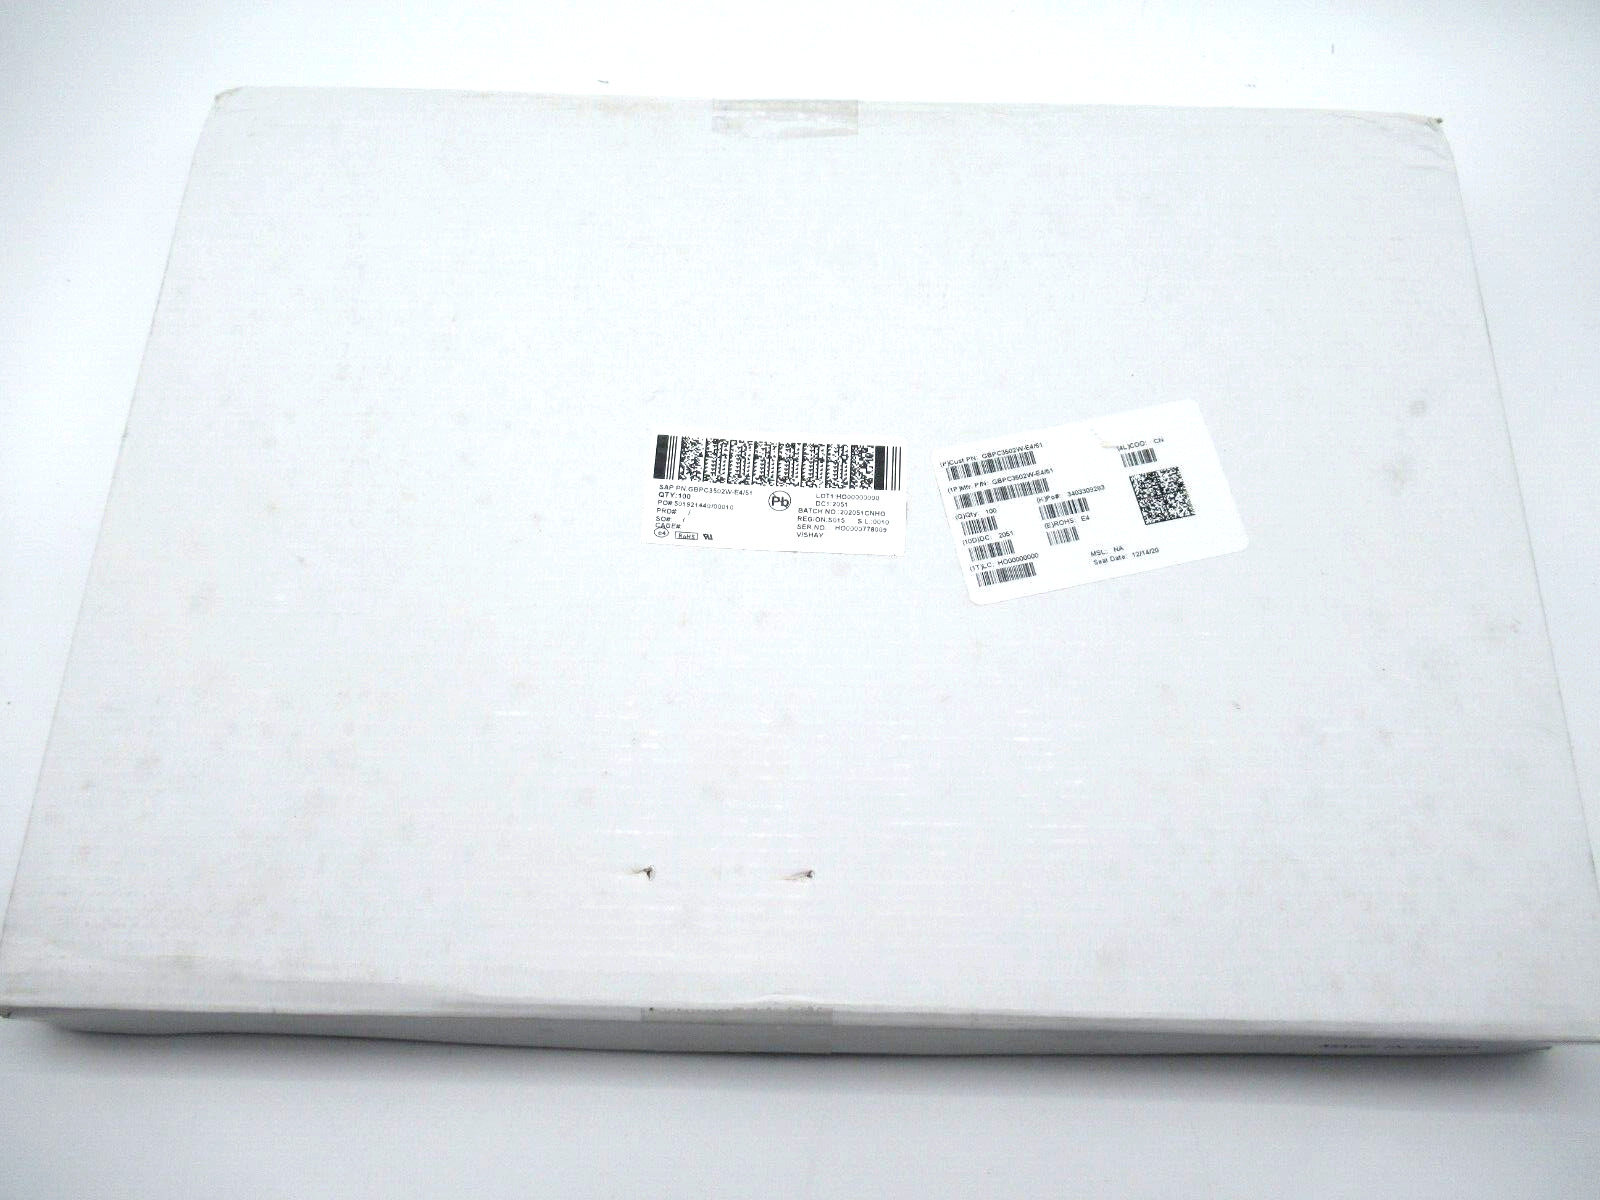 VISHAY GBPC3502W-E4/51 General Semiconductor Bridge Rectifiers 30A 200V *NEW*